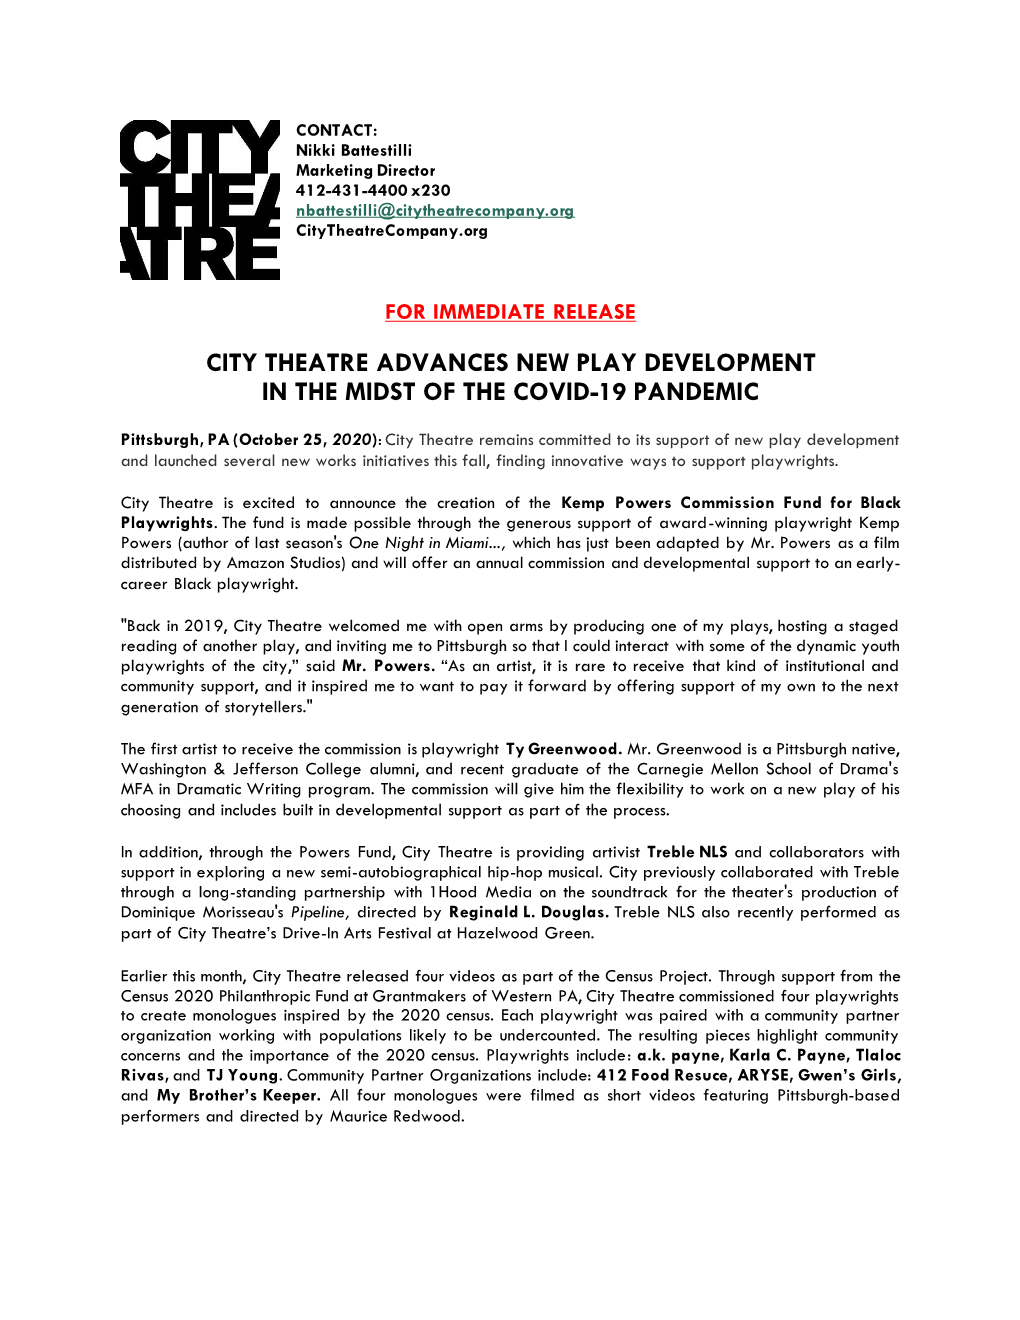 City Theatre Advances New Play Development in the Midst of the Covid-19 Pandemic